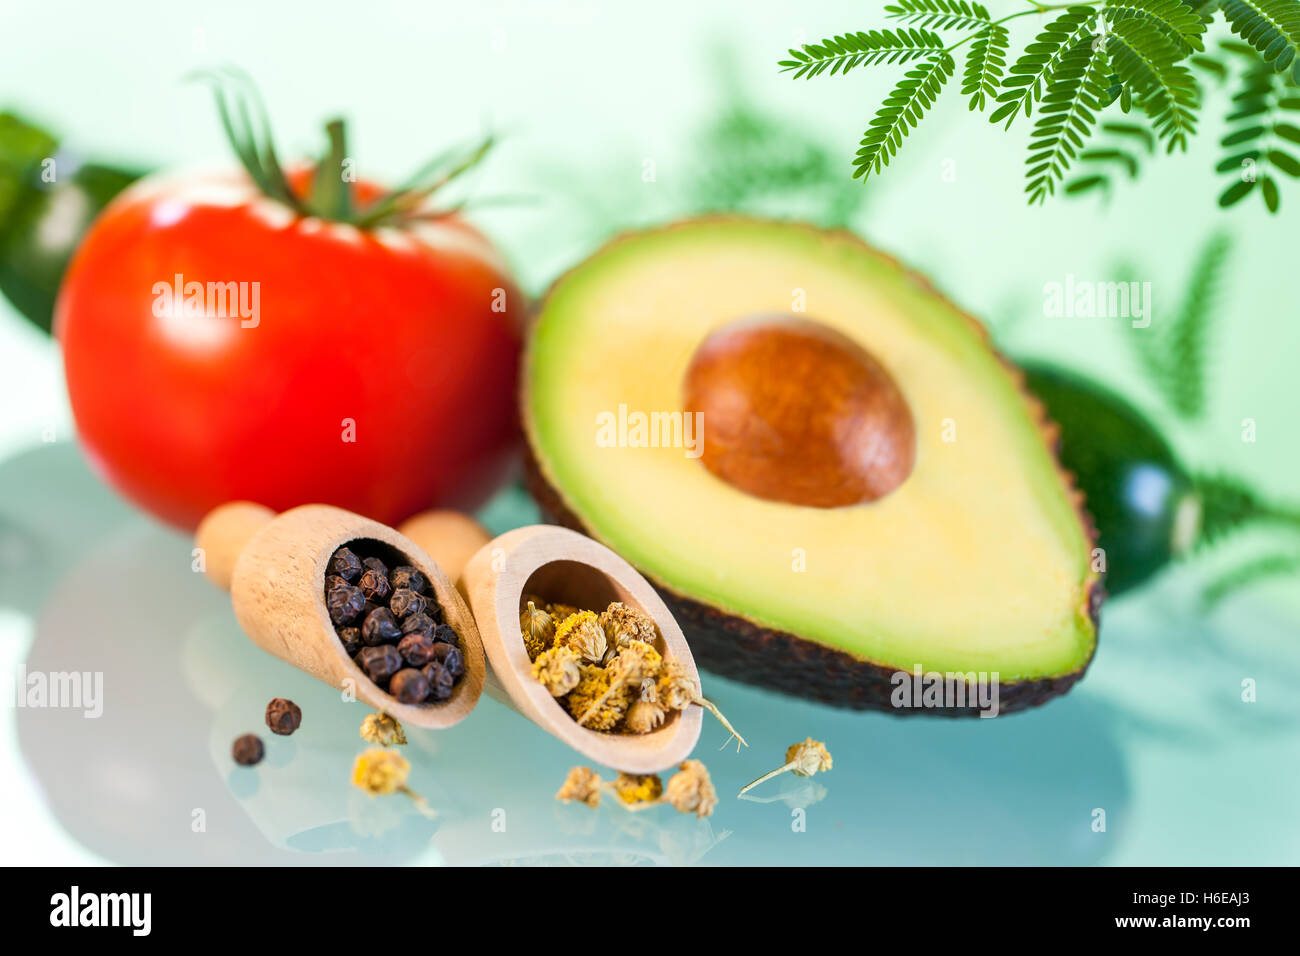 Macro close up Still life of Naturopathic products.Avocado with herbs and seeds against green background. Stock Photo